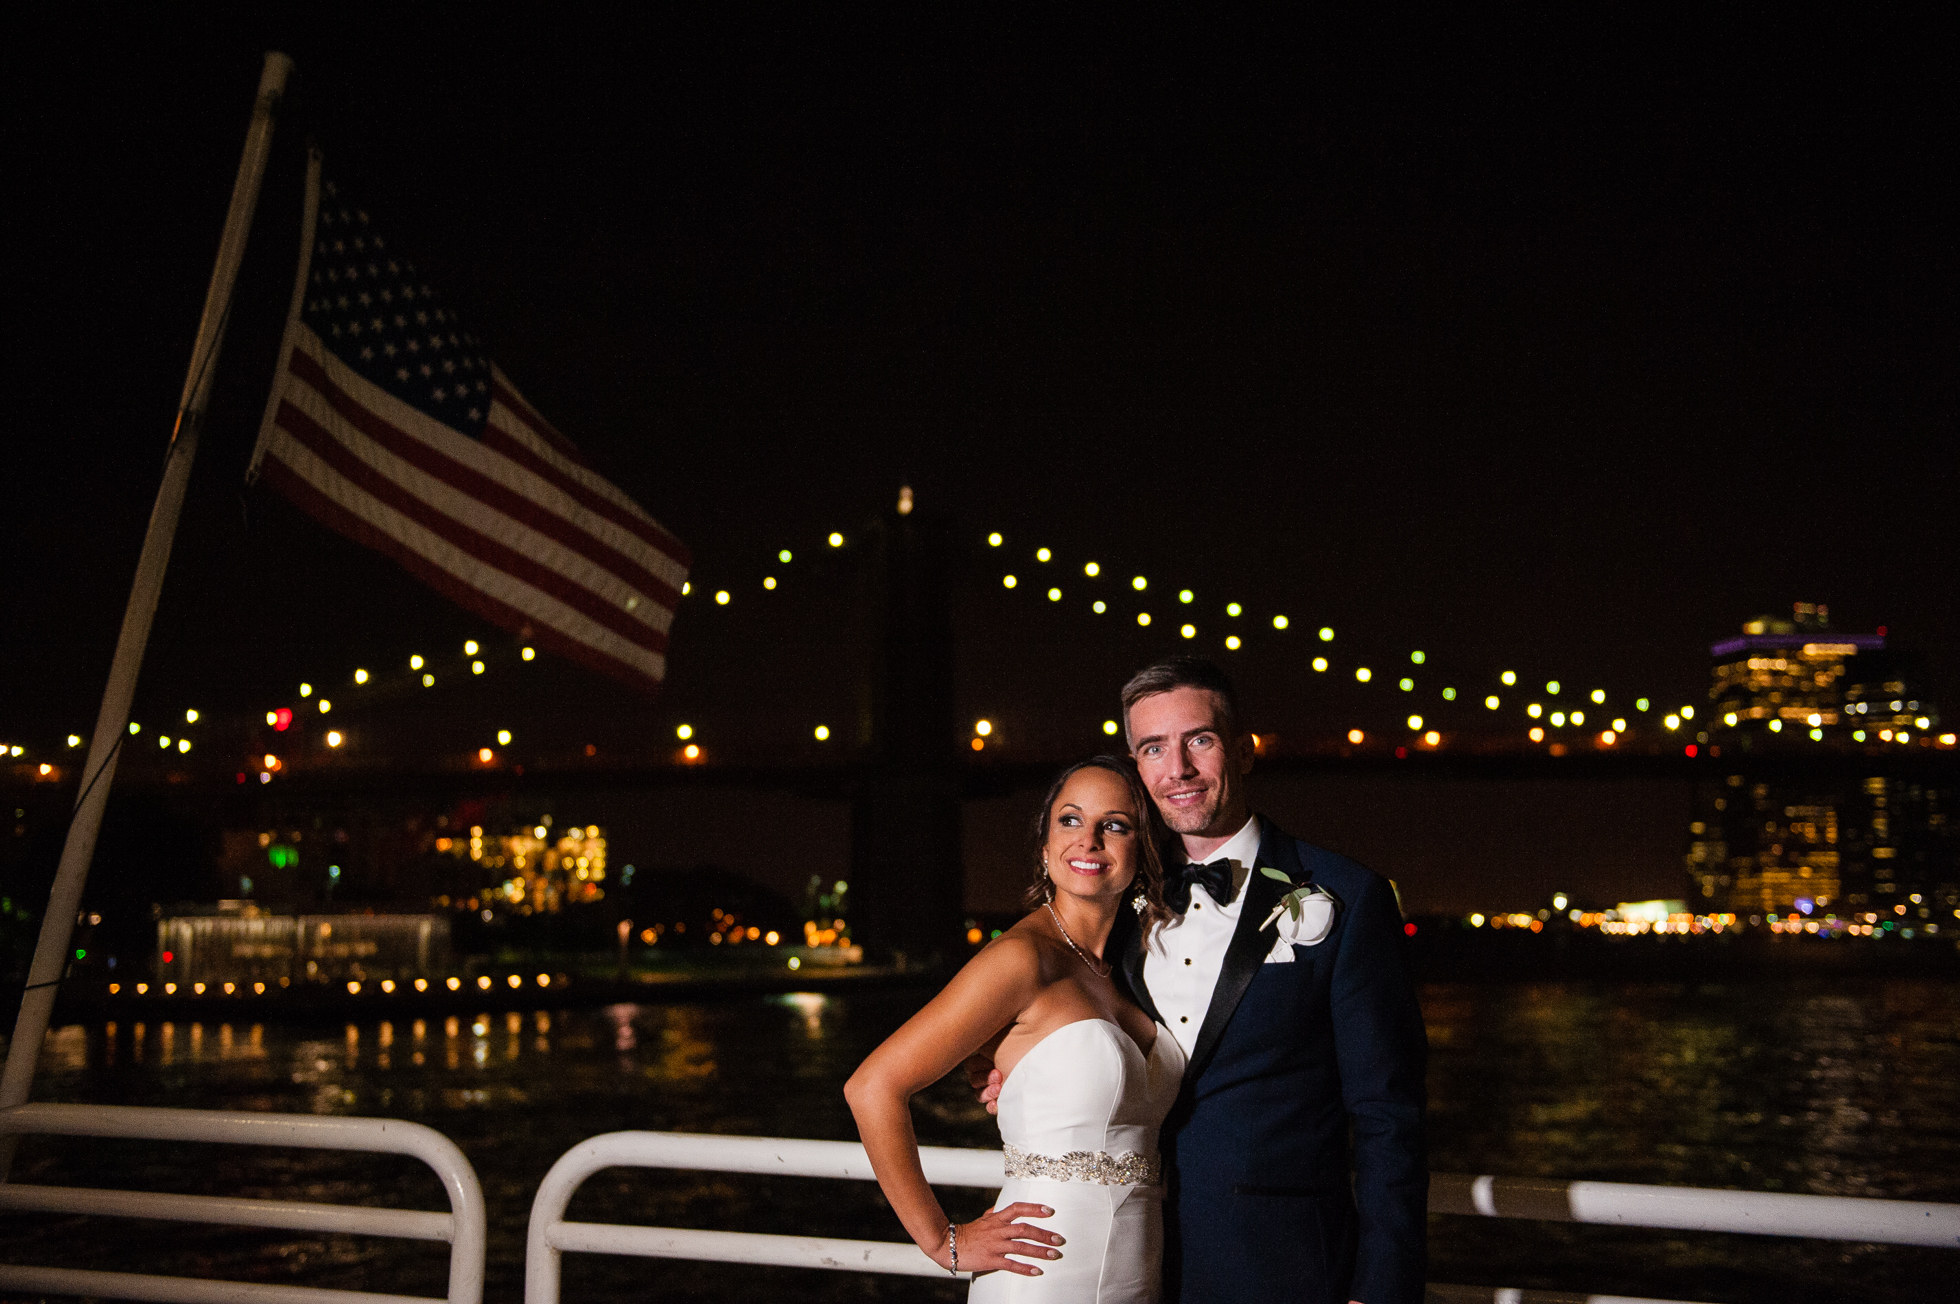 Epic Bride and Groom portraits on The Atlantica during a yacht wedding in the NY Harbor